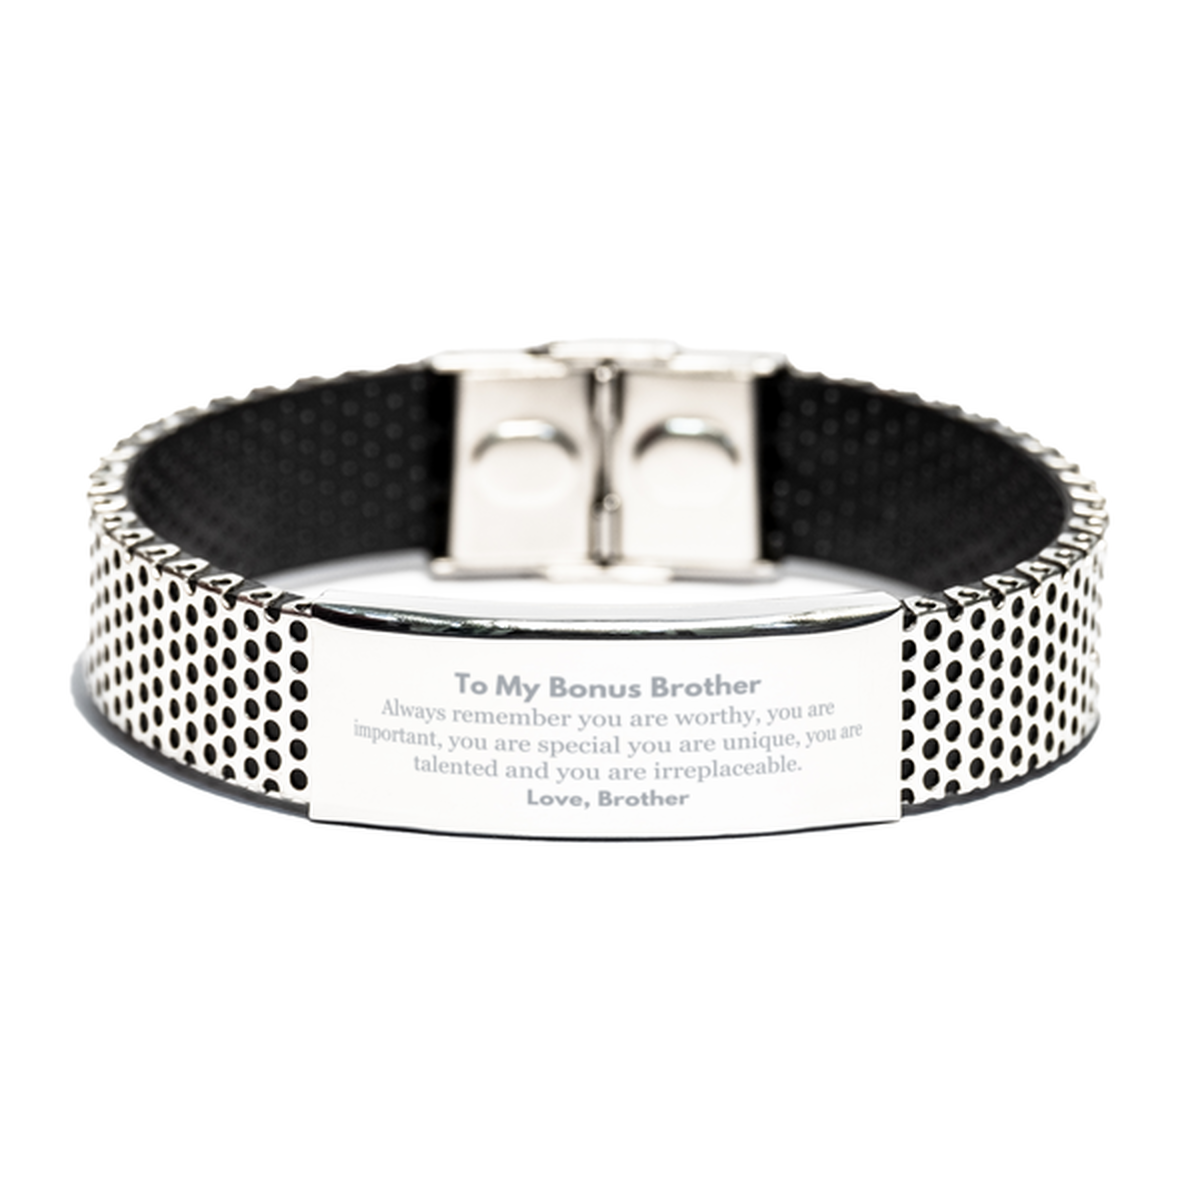 Bonus Brother Birthday Gifts from Brother, Inspirational Stainless Steel Bracelet for Bonus Brother Christmas Graduation Gifts for Bonus Brother Always remember you are worthy, you are important. Love, Brother